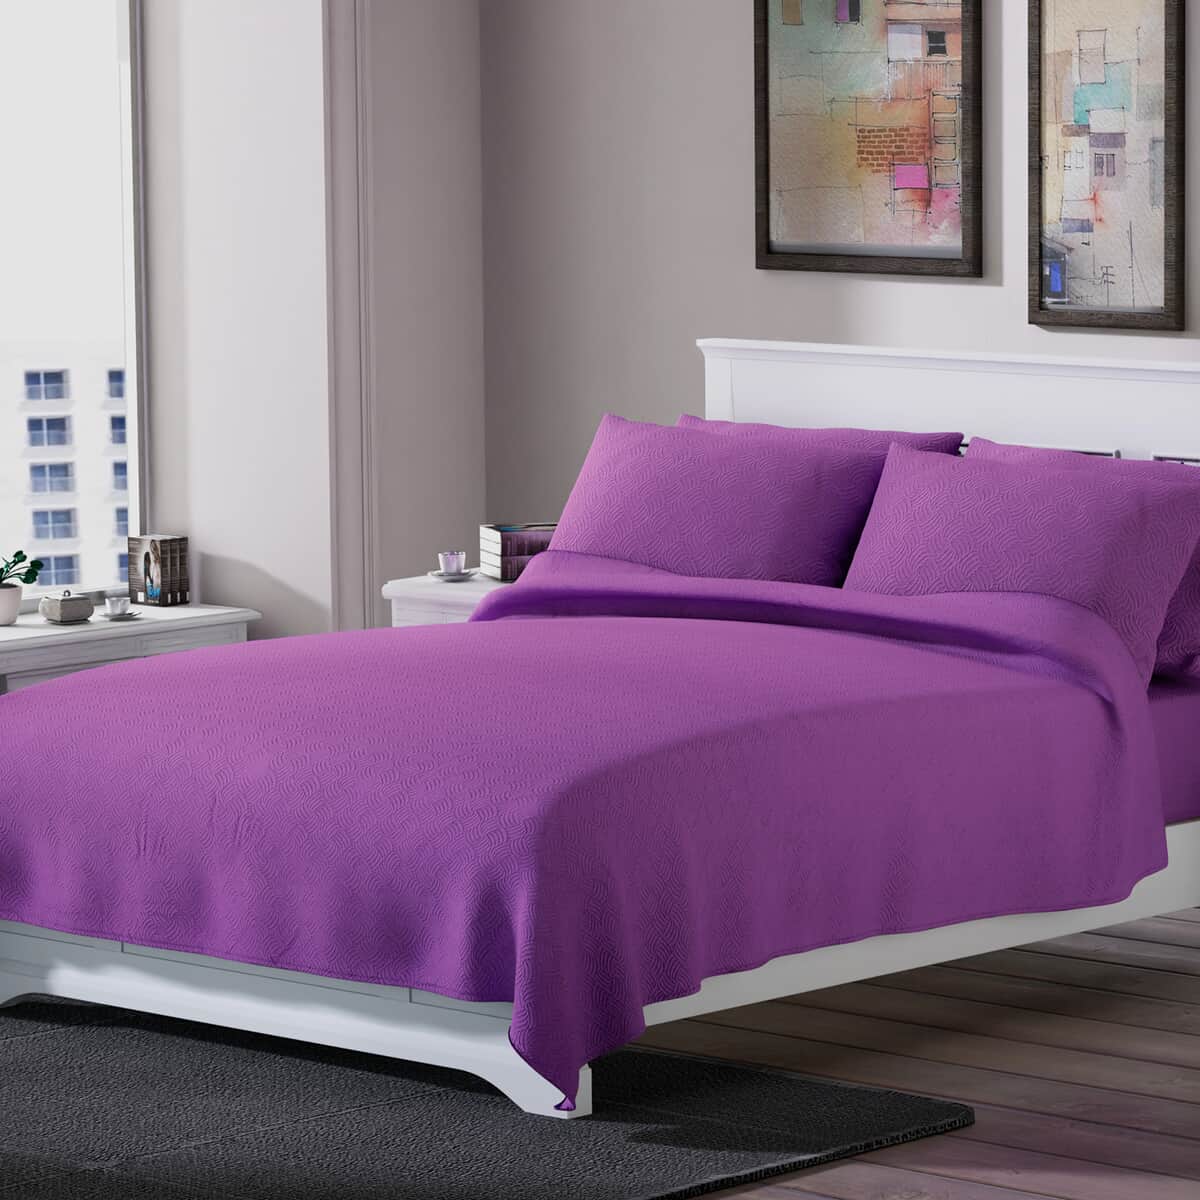 Homesmart Purple Solid Embossed 6 pcs Microfiber Sheet Set - King, Bed Sheets, Fitted Sheet, Bed Sheet Set, Microfiber Sheets image number 0